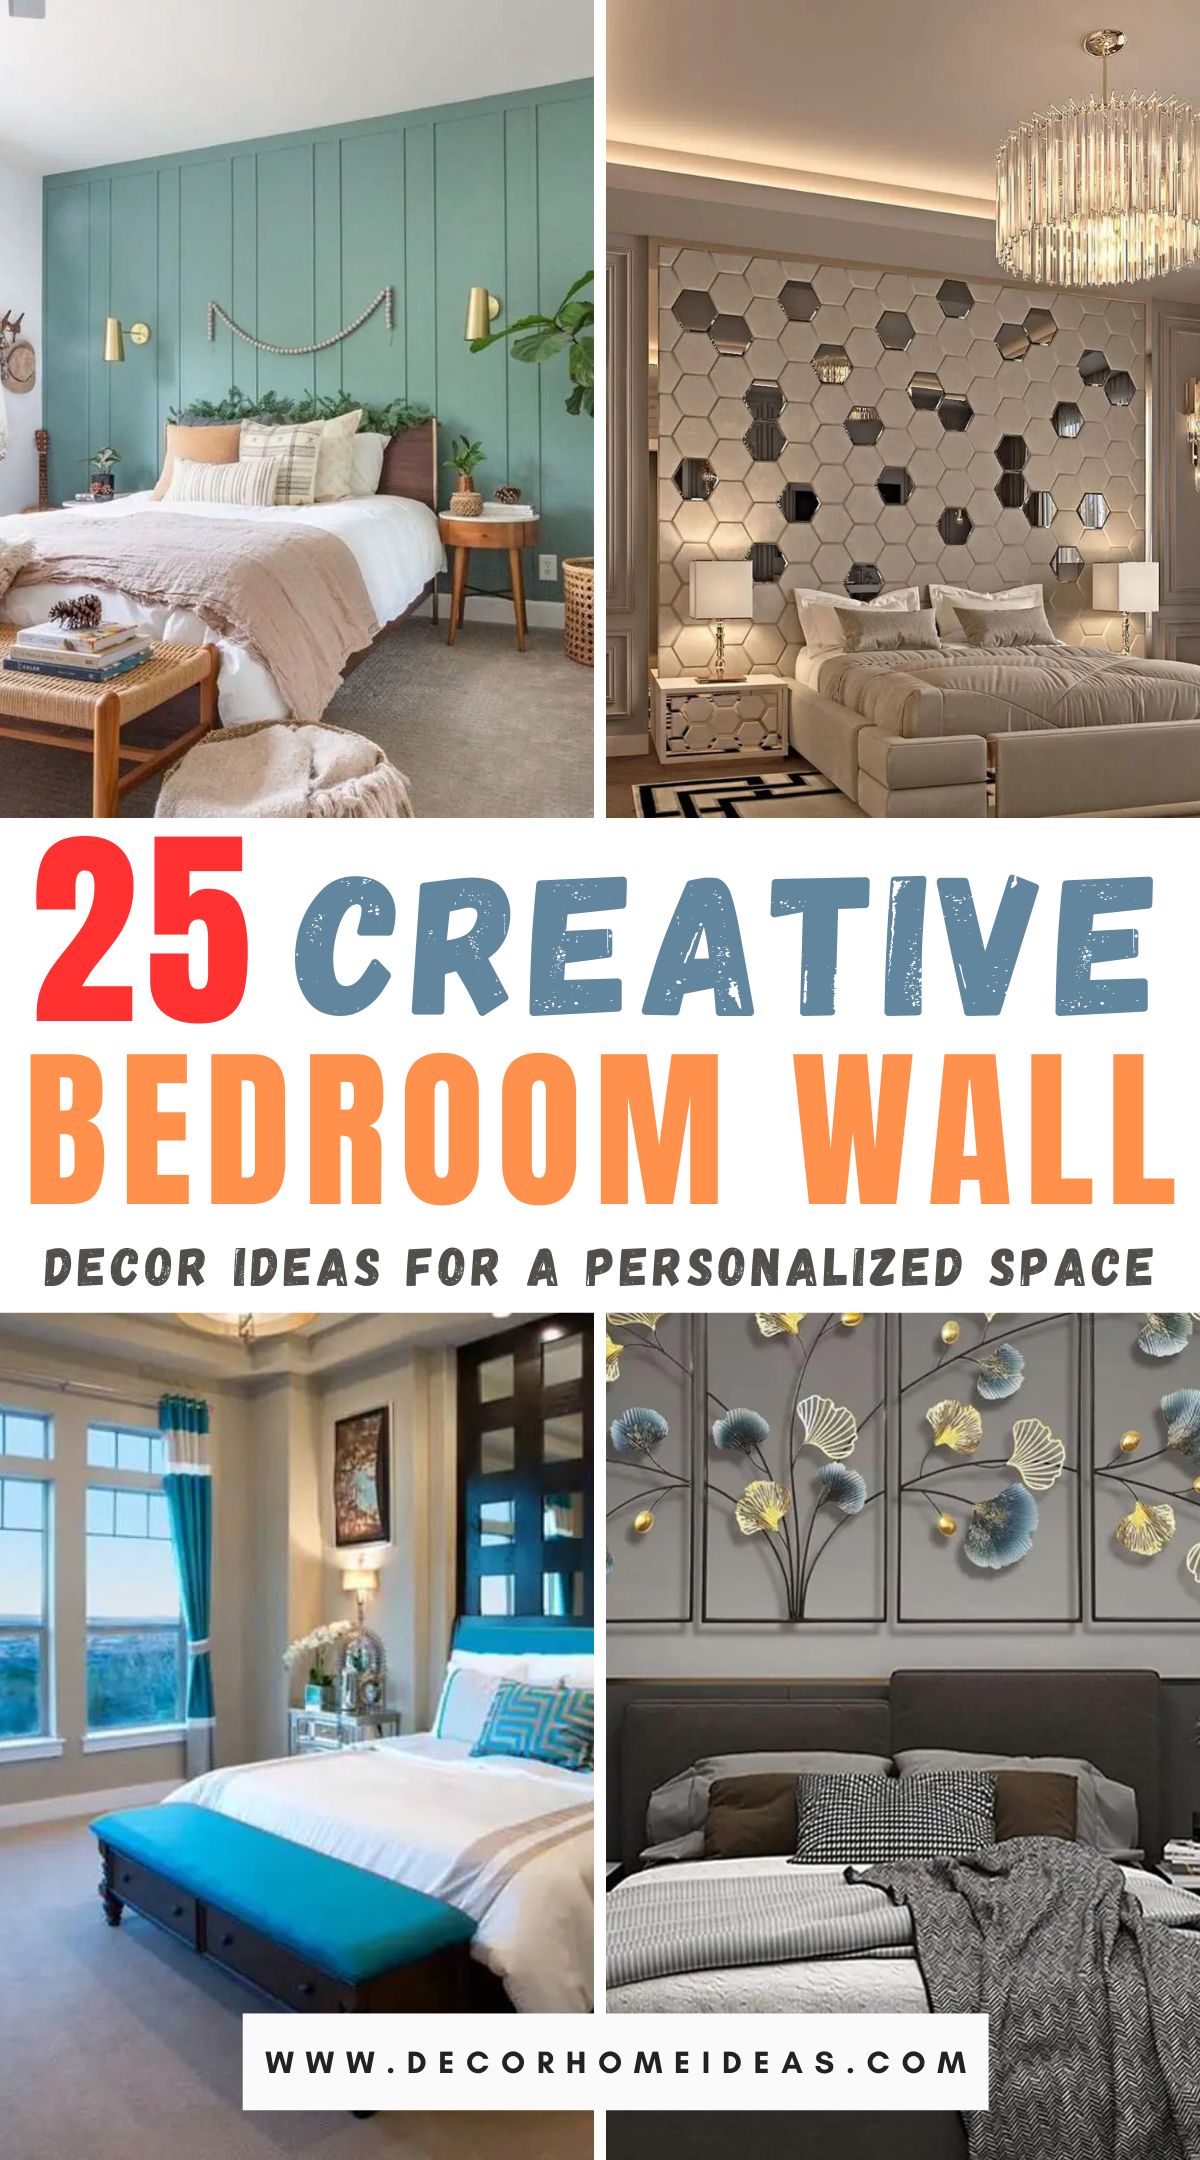 Transform your bedroom with style and elegance using our curated collection of 25 dreamy bedroom wall decor ideas. From captivating artwork to creative design concepts, discover the perfect inspirations to enhance your space and create a haven of dreams.